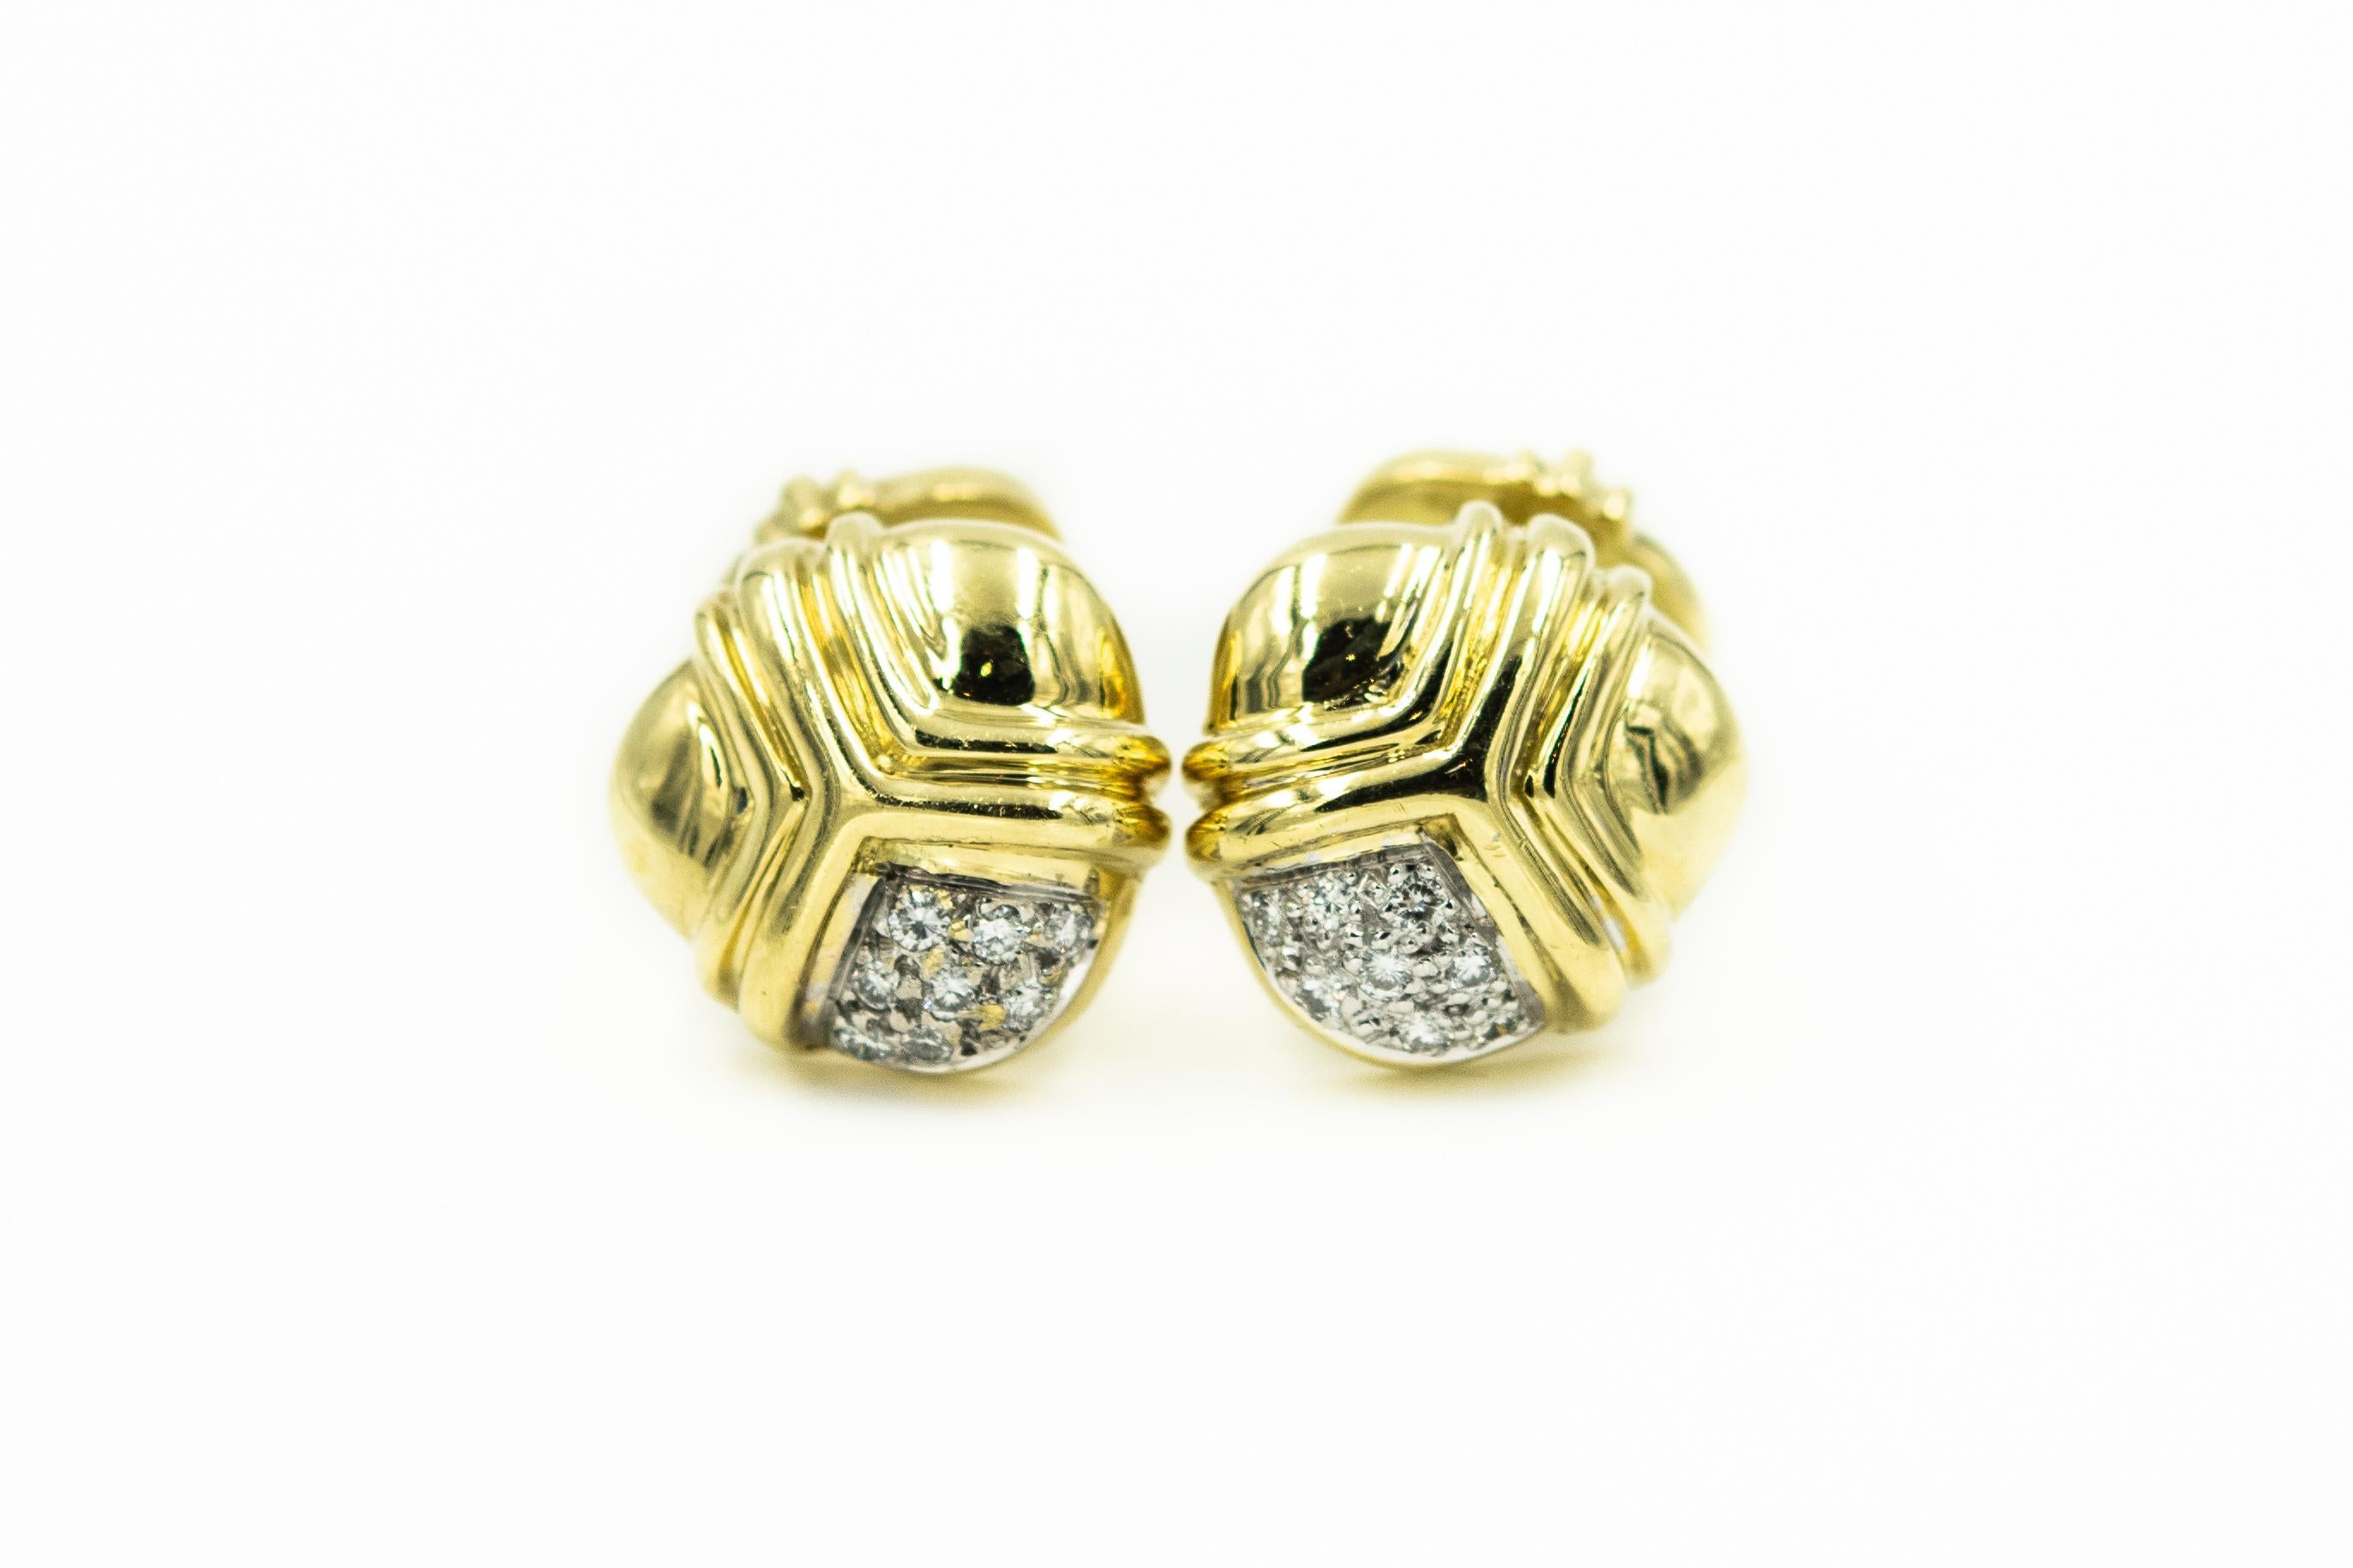 Stunning late 20th century 18k yellow and white gold cufflinks and tie tac set by Cassis. The set features a highly stylized three dimensional design with 3 sections that are divided by 3 lines.  Each piece has eight diamonds in one section with a